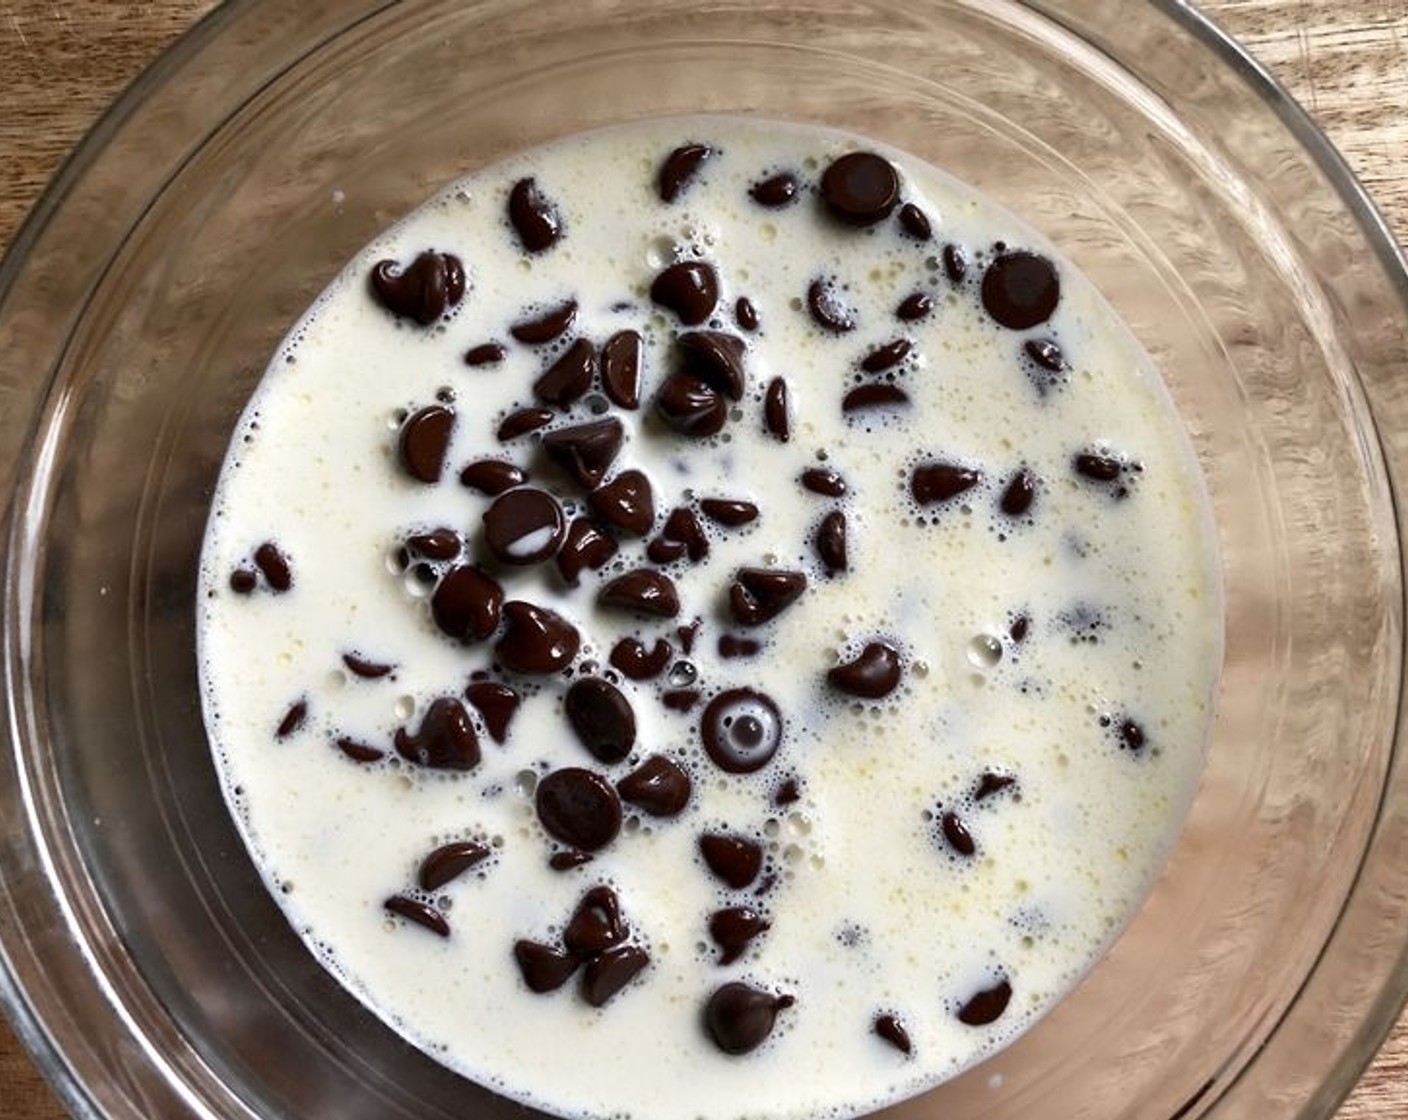 step 8 Pour the Heavy Cream (1/2 cup) into a microwave-safe bowl and heat in the microwave until simmering, about 45 seconds. Pour the hot cream over the chocolate chips. Let stand for two minutes, then stir until smooth.